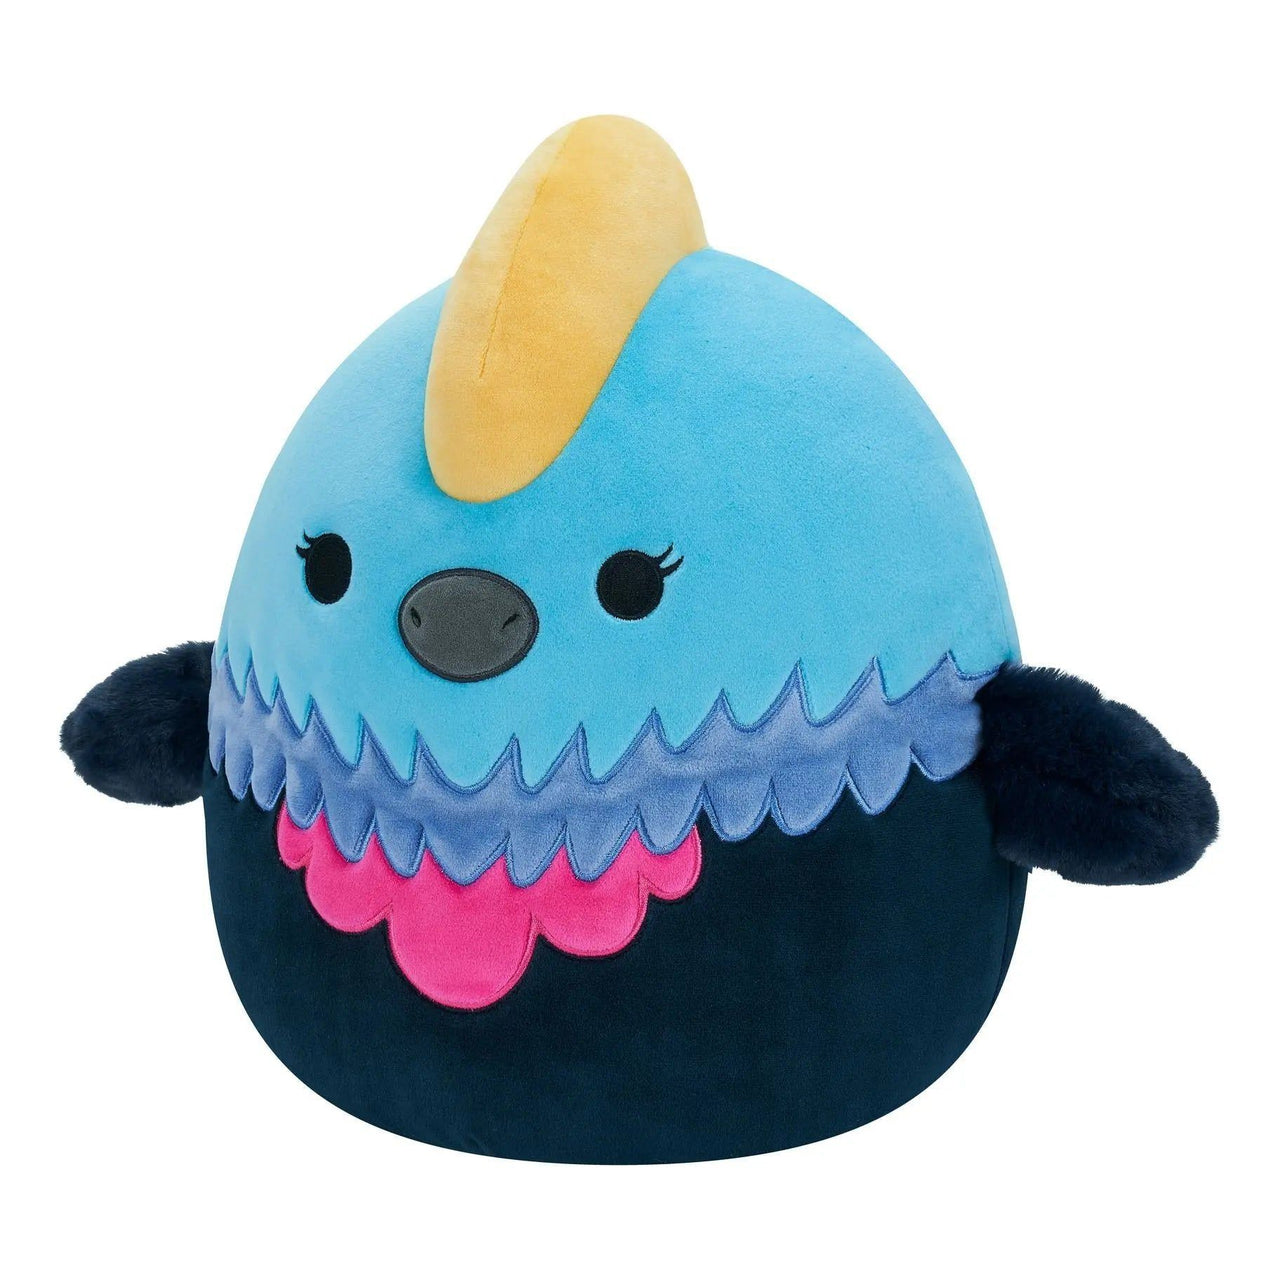 Squishmallows 12" Melrose the Cassowary Plush Squishmallows